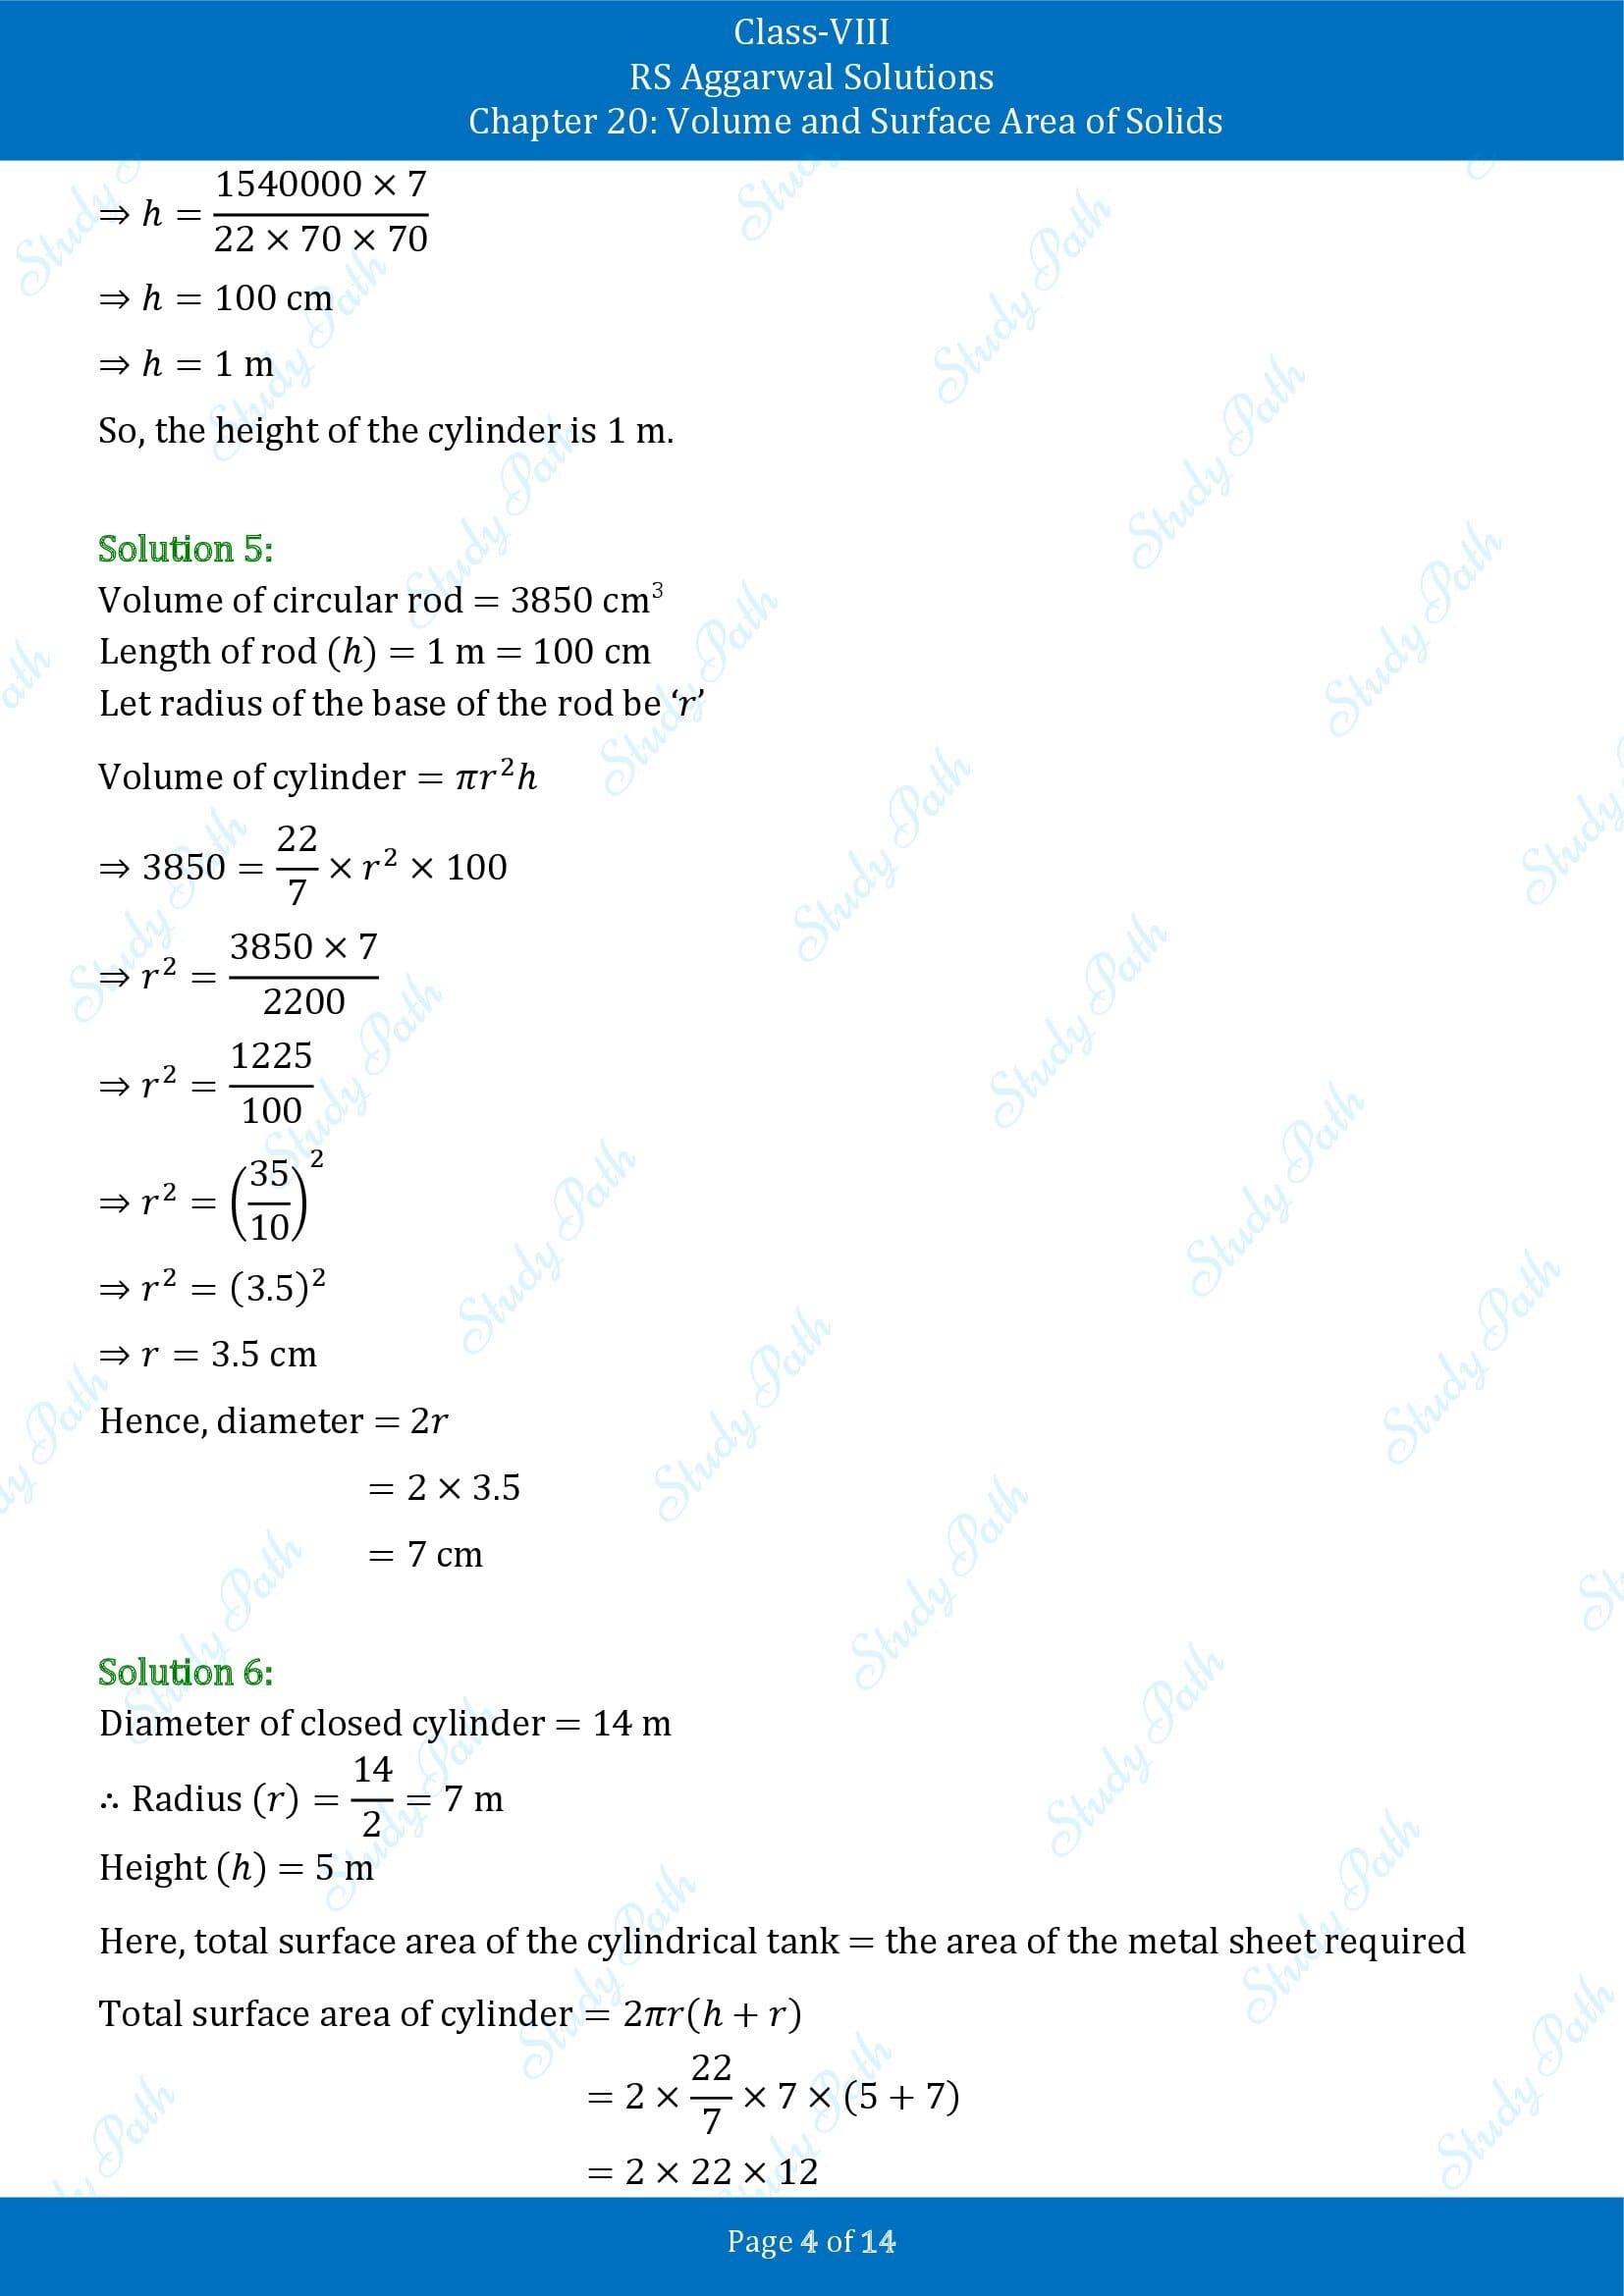 RS Aggarwal Solutions Class 8 Chapter 20 Volume and Surface Area of Solids Exercise 20B 00004